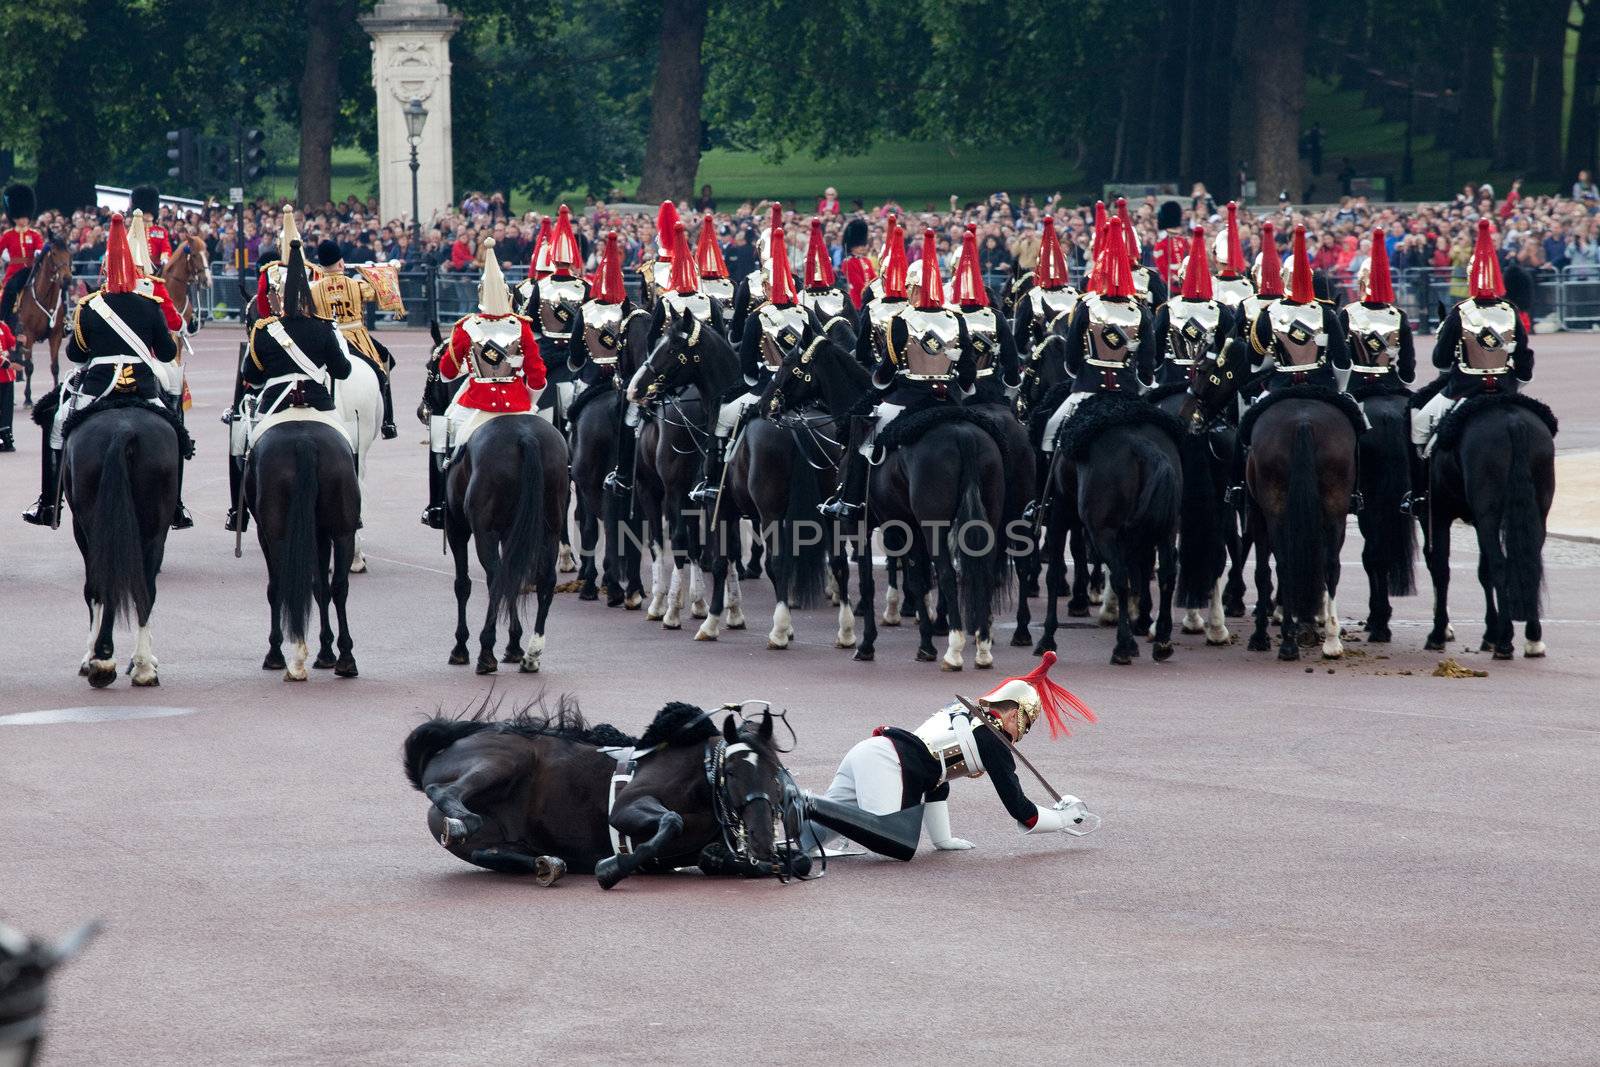 LONDON - JUNE 11: Royals horse Guard falls off horse at Trooping the Colour ceremony in London June 11, 2011. Ceremony is performed by regiments on the occasion of the Queen's Official Birthday